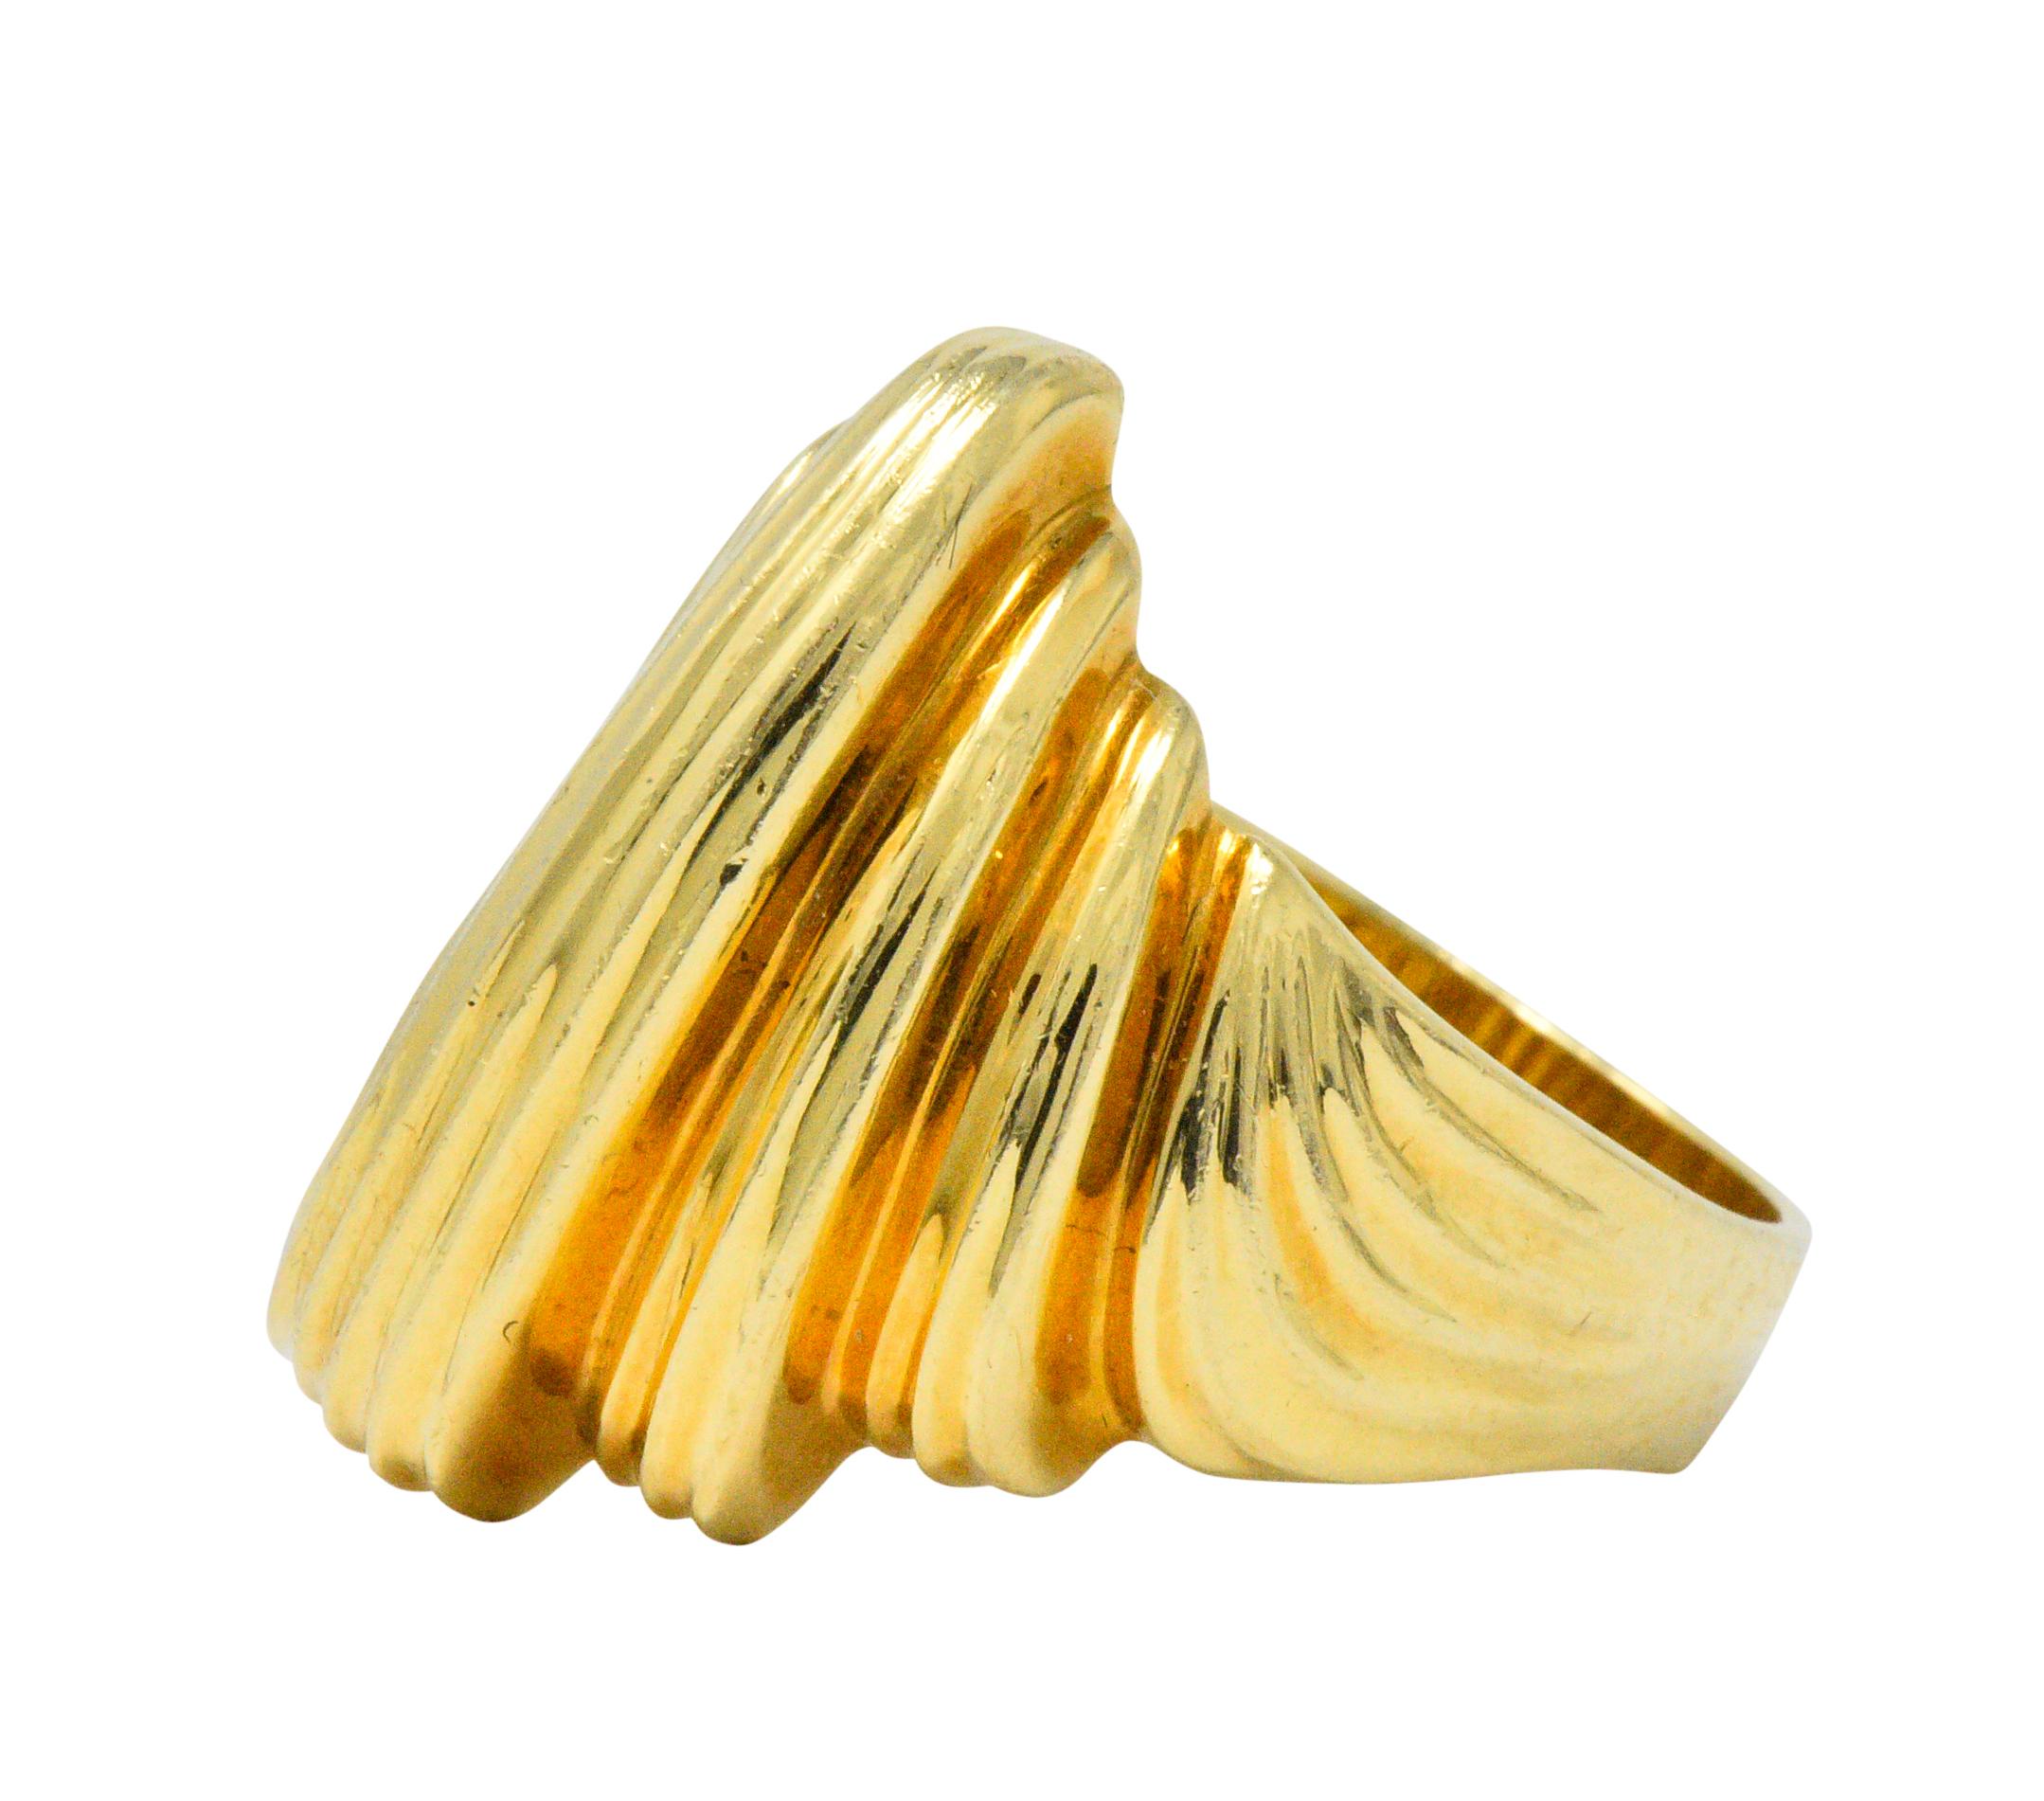 Featuring high polished gold with fluted and tiered elements

Signed Dunay, with maker's mark

Ring Size: 9 1/2 & Sizable

Top measures 22.5 mm and sits 6.0 mm high

Total Weight: 11.0 Grams

Fluid. Bold. Striking. 
 

Stock Number: We- 1535